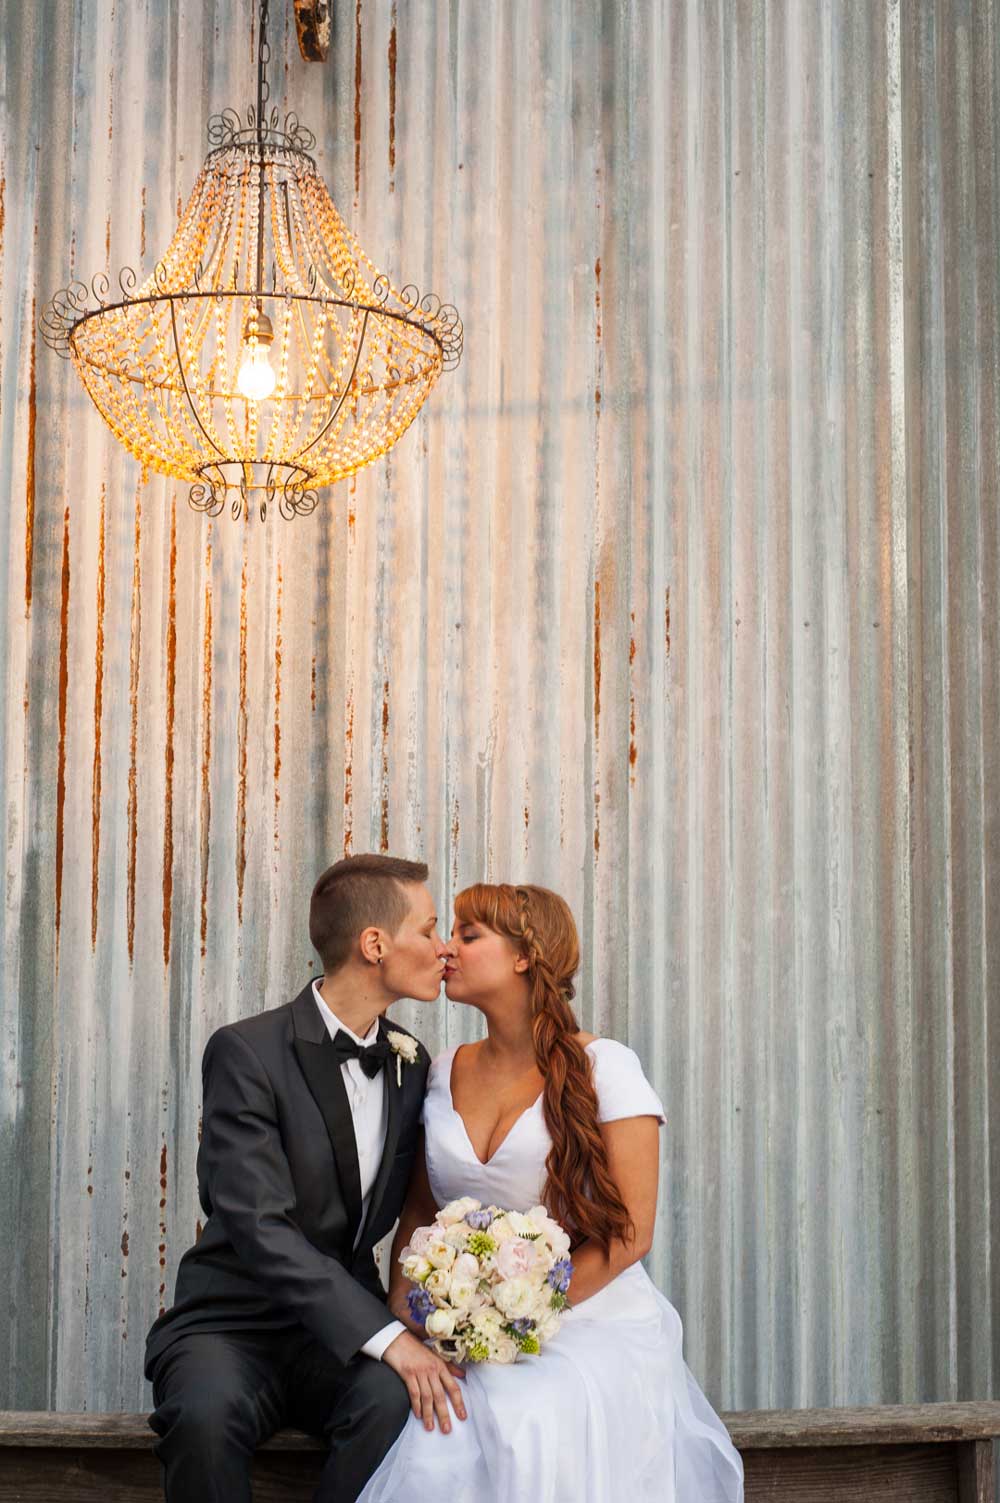 you-are-raven-lesbian-wedding-kiss-butch-femme-chandelier-styled-shoot-59